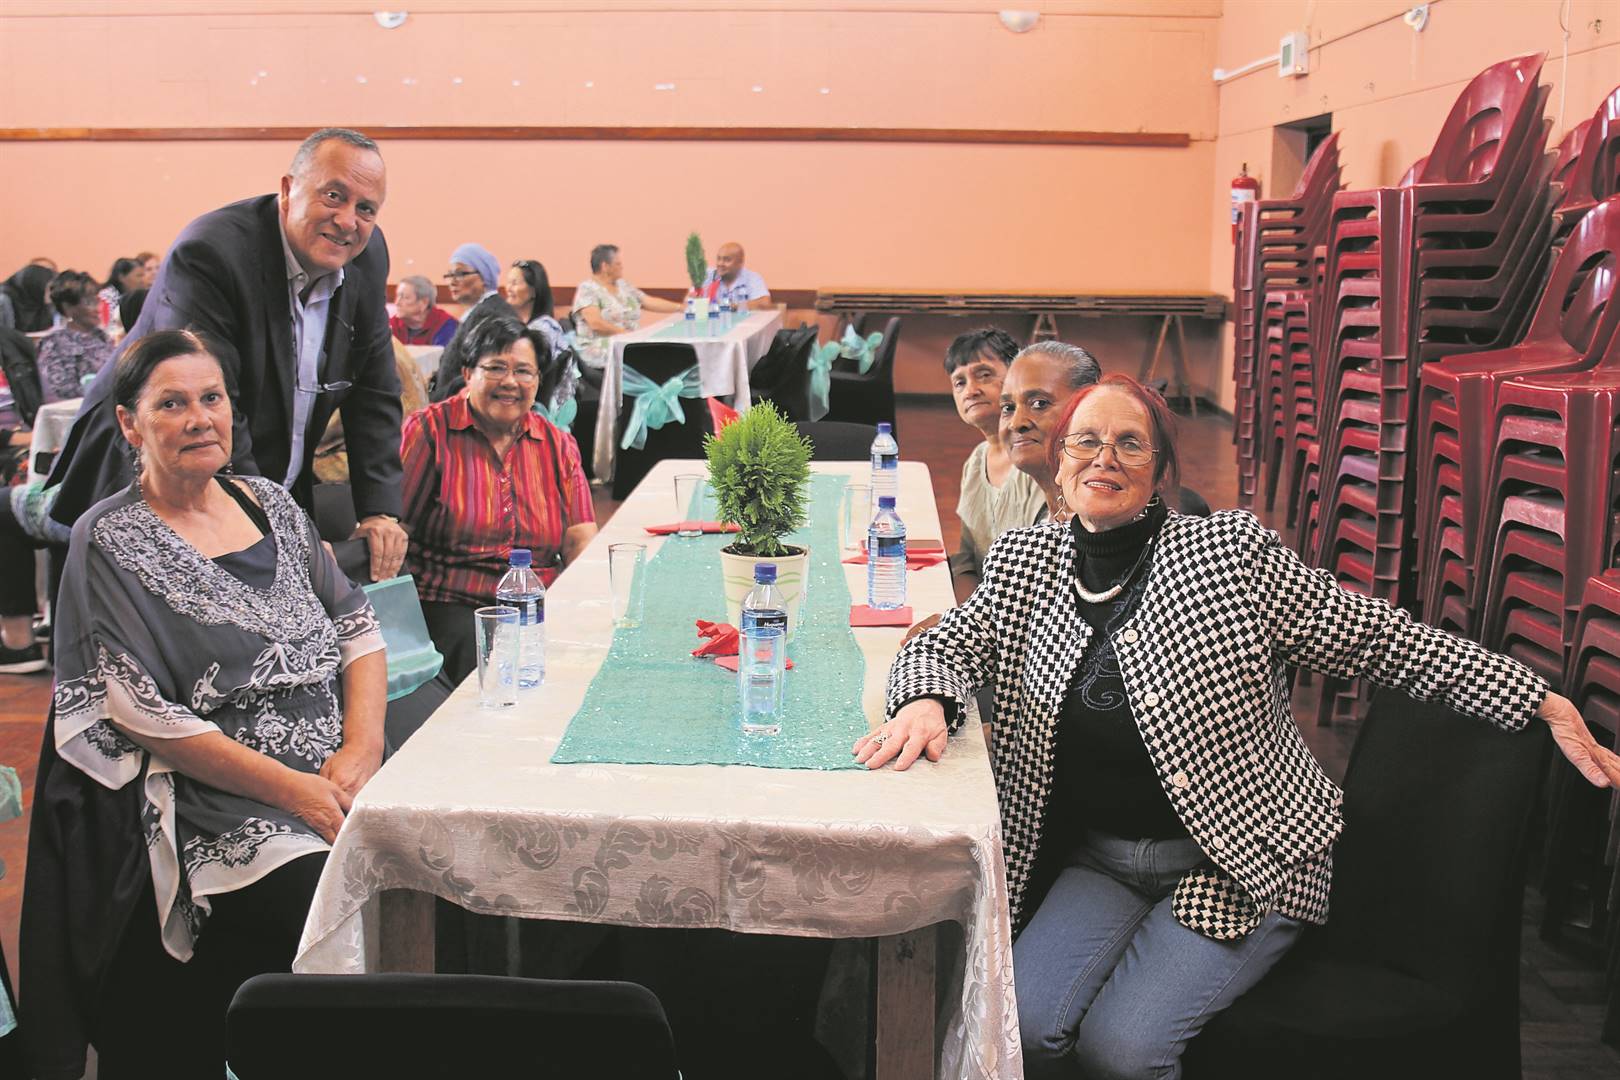 Lansdowne seniors celebrate the close of the year at luncheon | News24